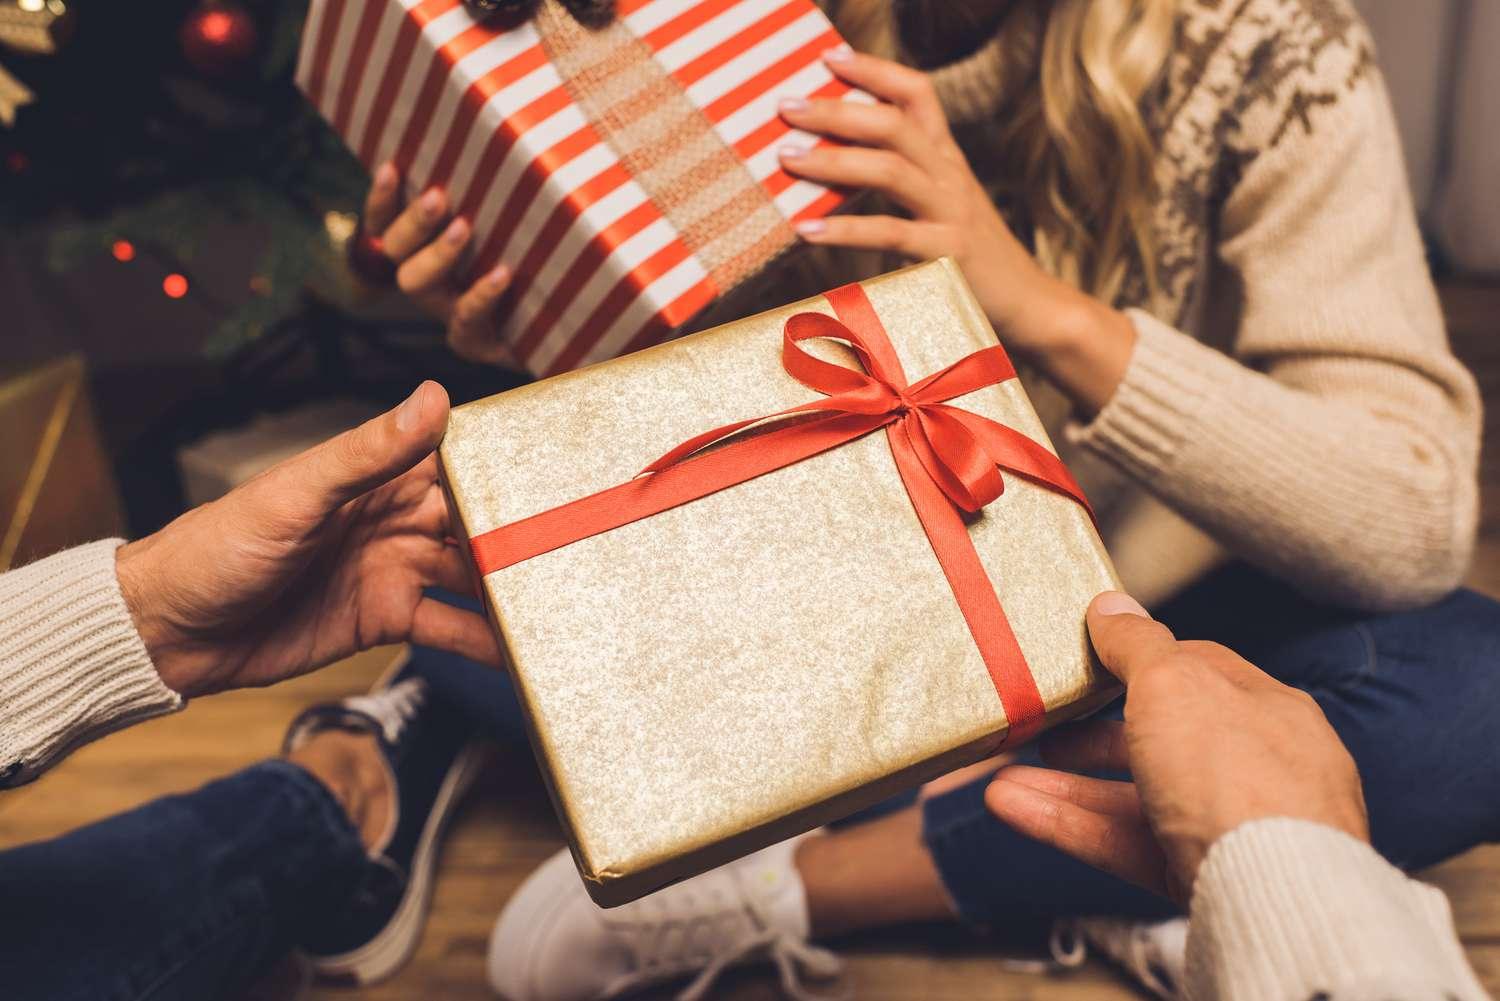 10 of the Best Christmas Gift Ideas for Women - ulikeofficial